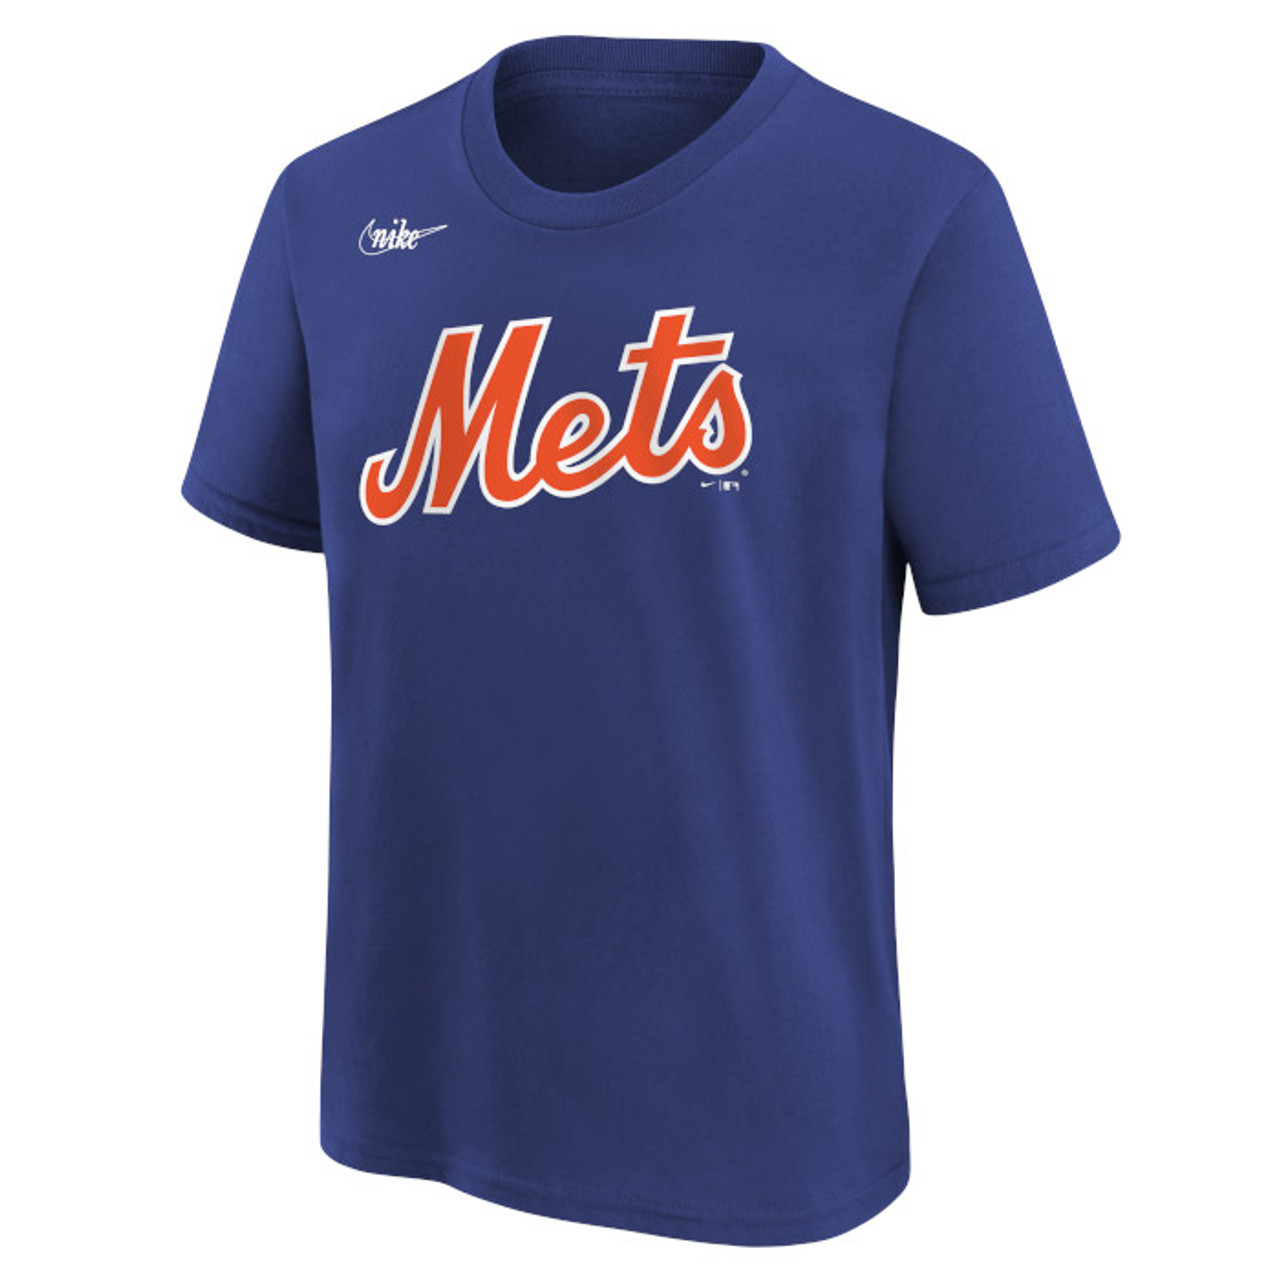 Tom Seaver Youth Jersey - NY Mets Replica Kids Home Jersey